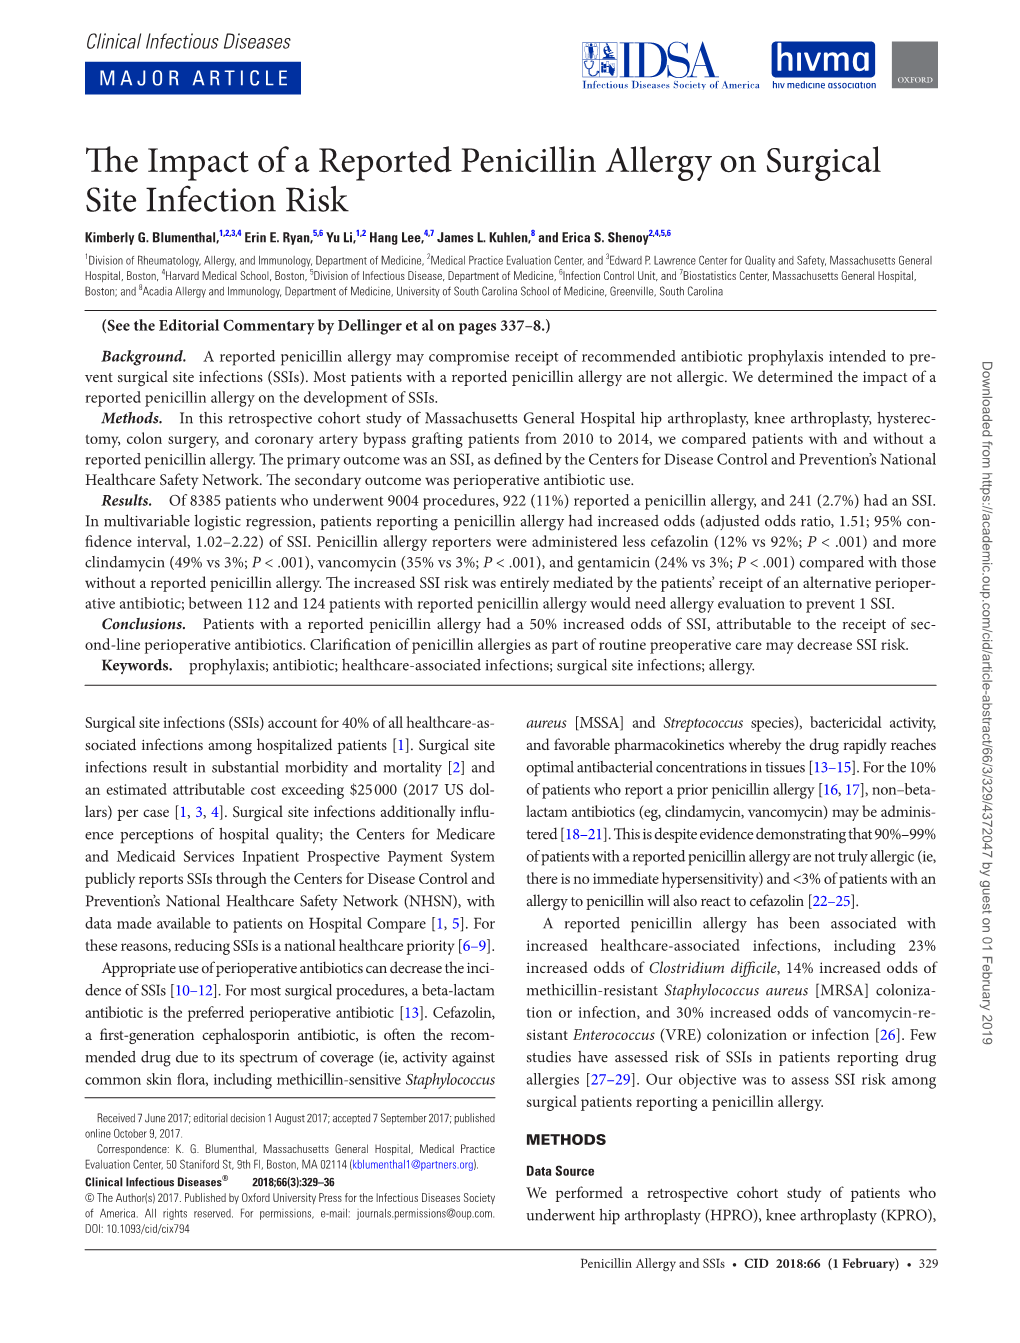 The Impact of a Reported Penicillin Allergy on Surgical Site Infection Risk Kimberly G